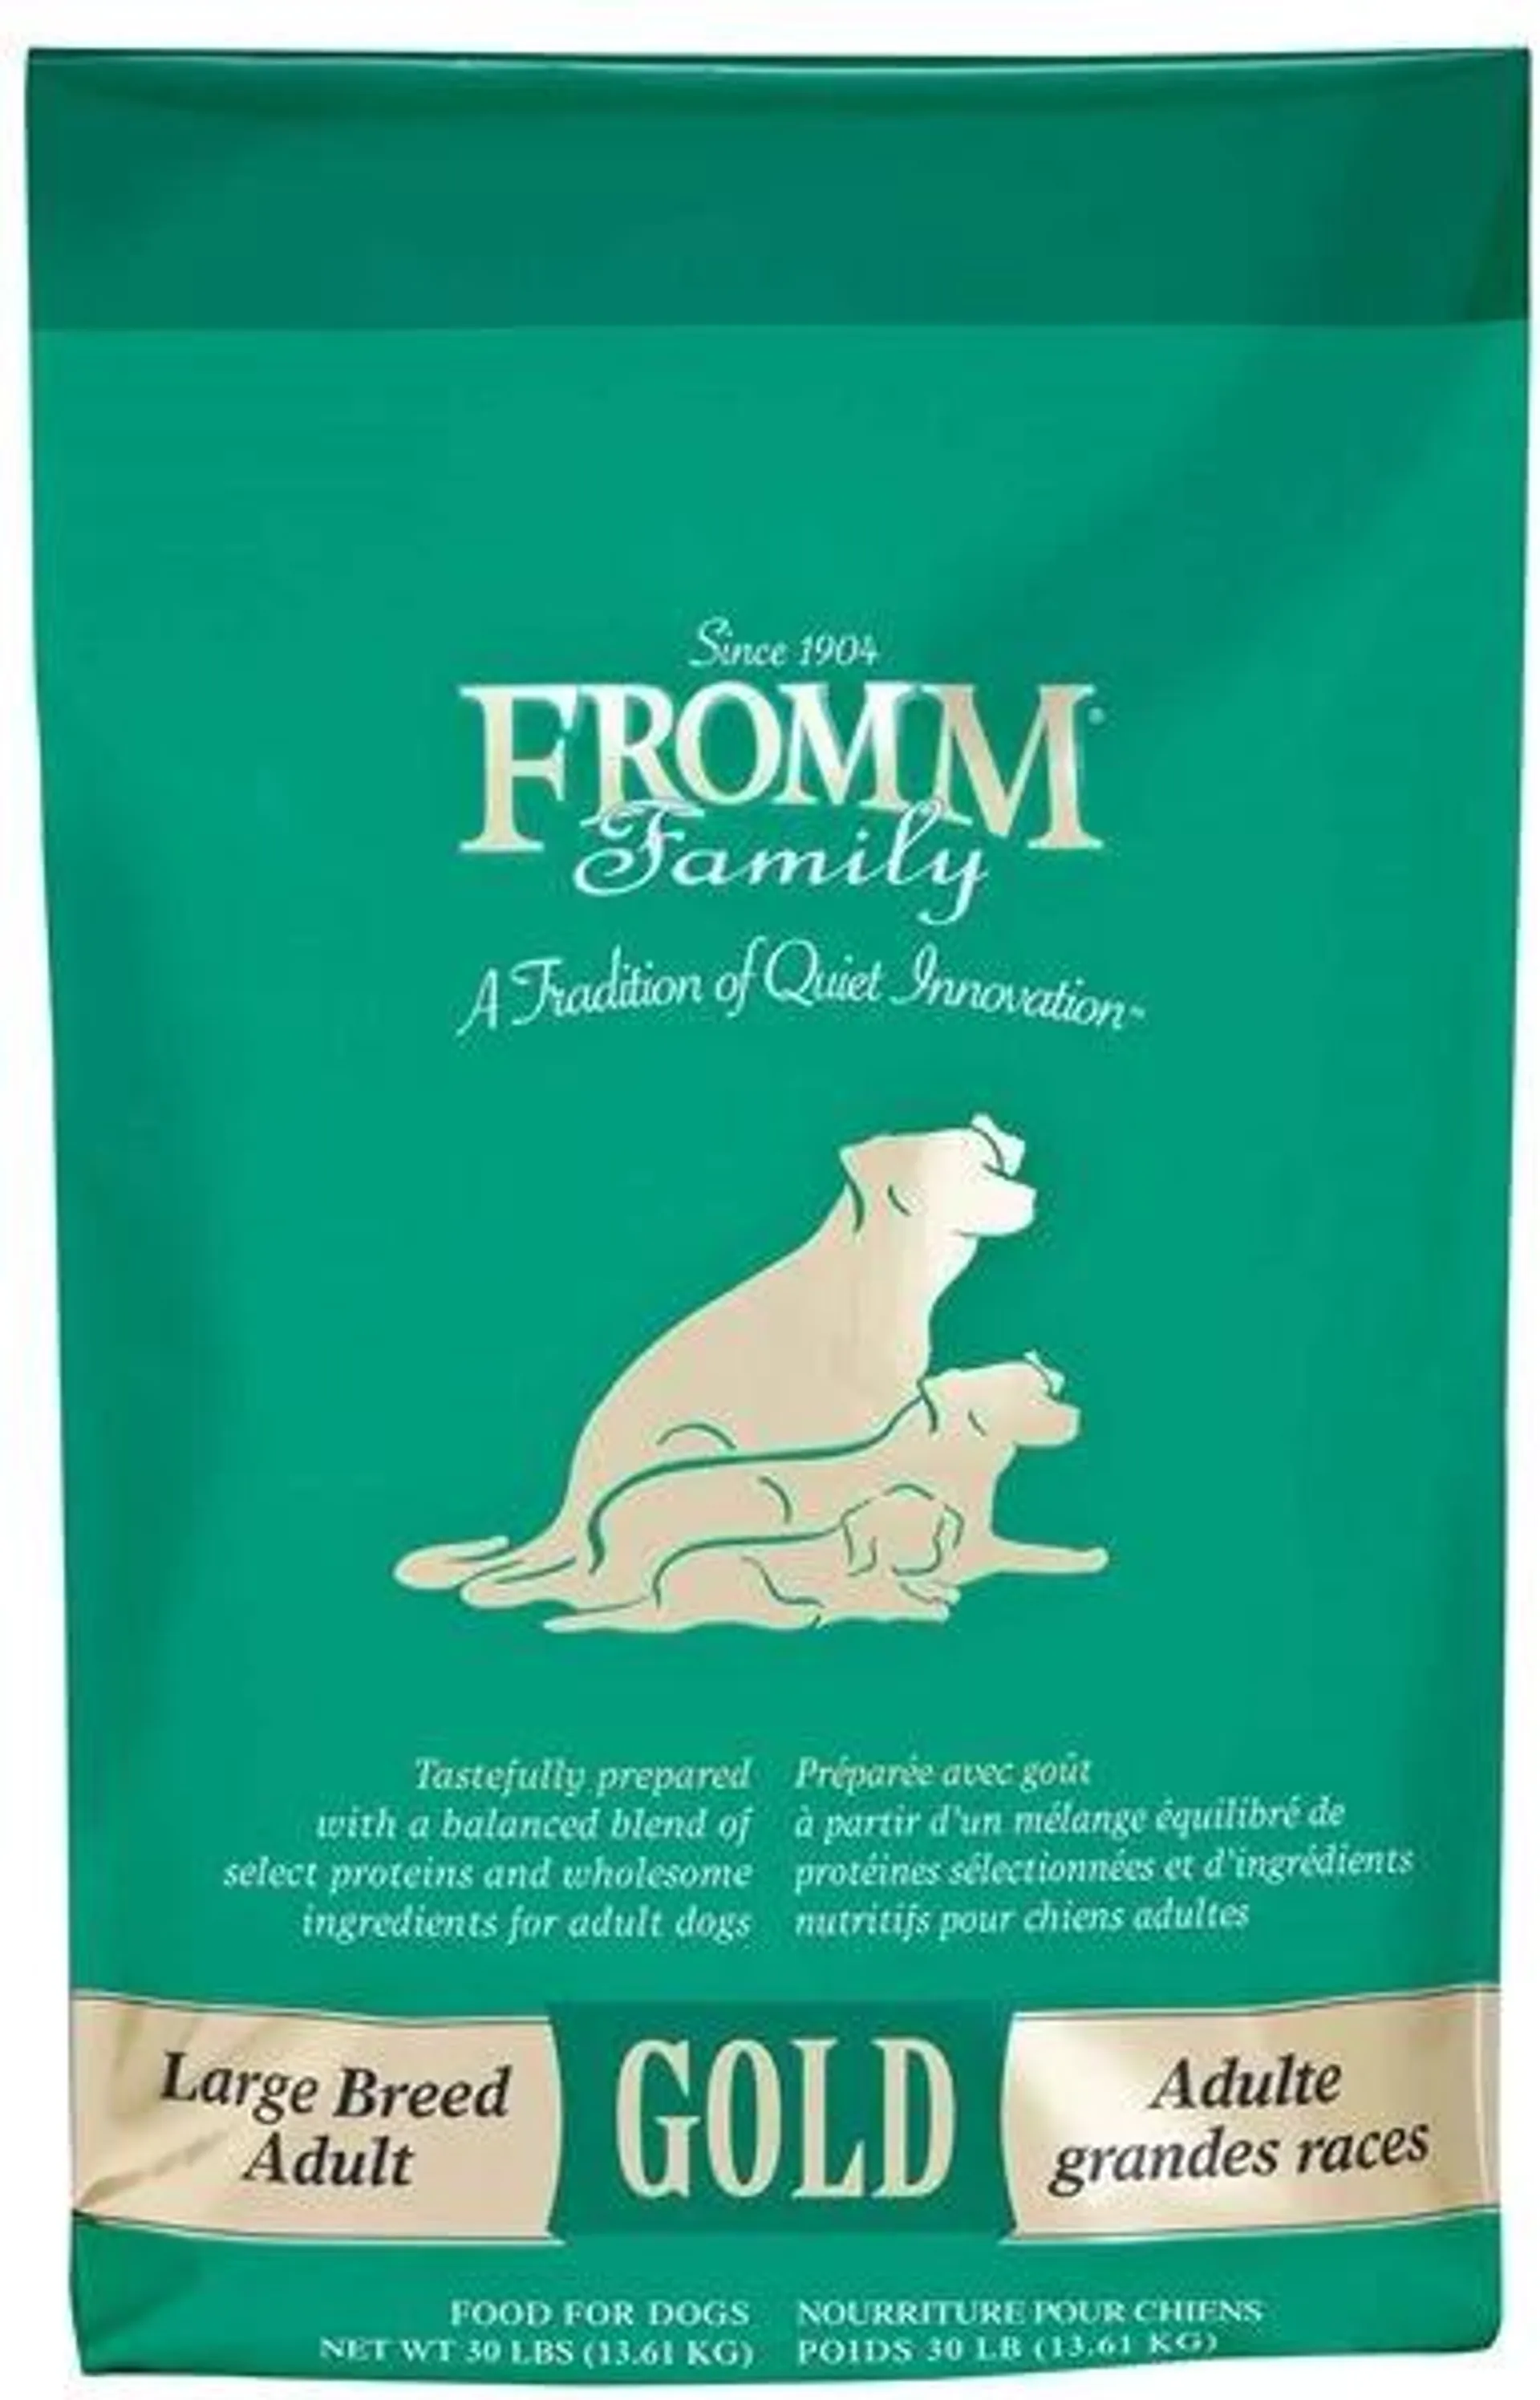 Fromm Gold Large Breed Adult Gold Dry Dog Food, 30 Pounds